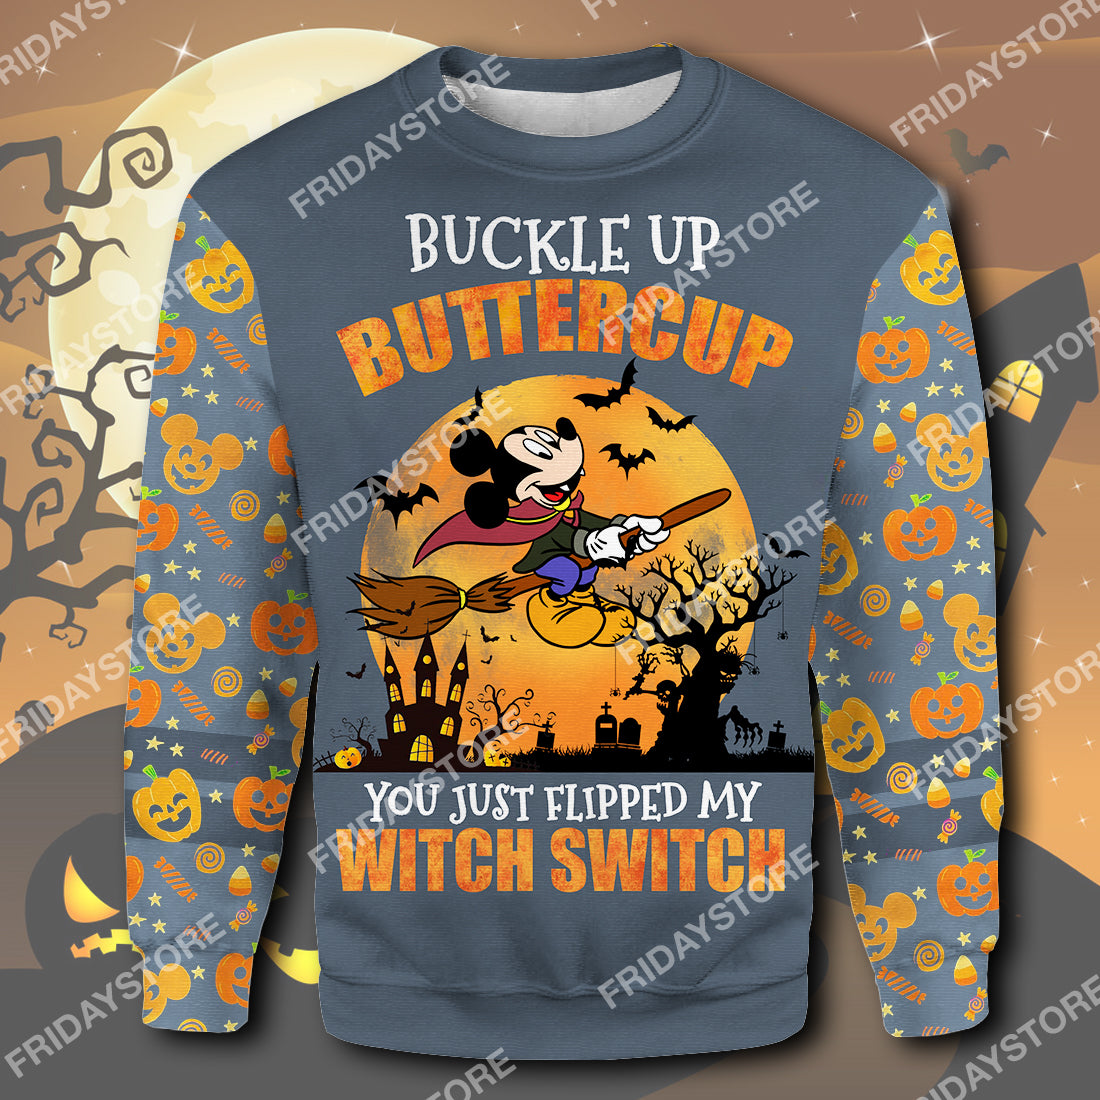 Unifinz DN T-shirt Buckle Up Buttercup You Just Flipped My Witch Switch T-shirt High Quality DN MK Mouse Hoodie Sweater Tank 2024